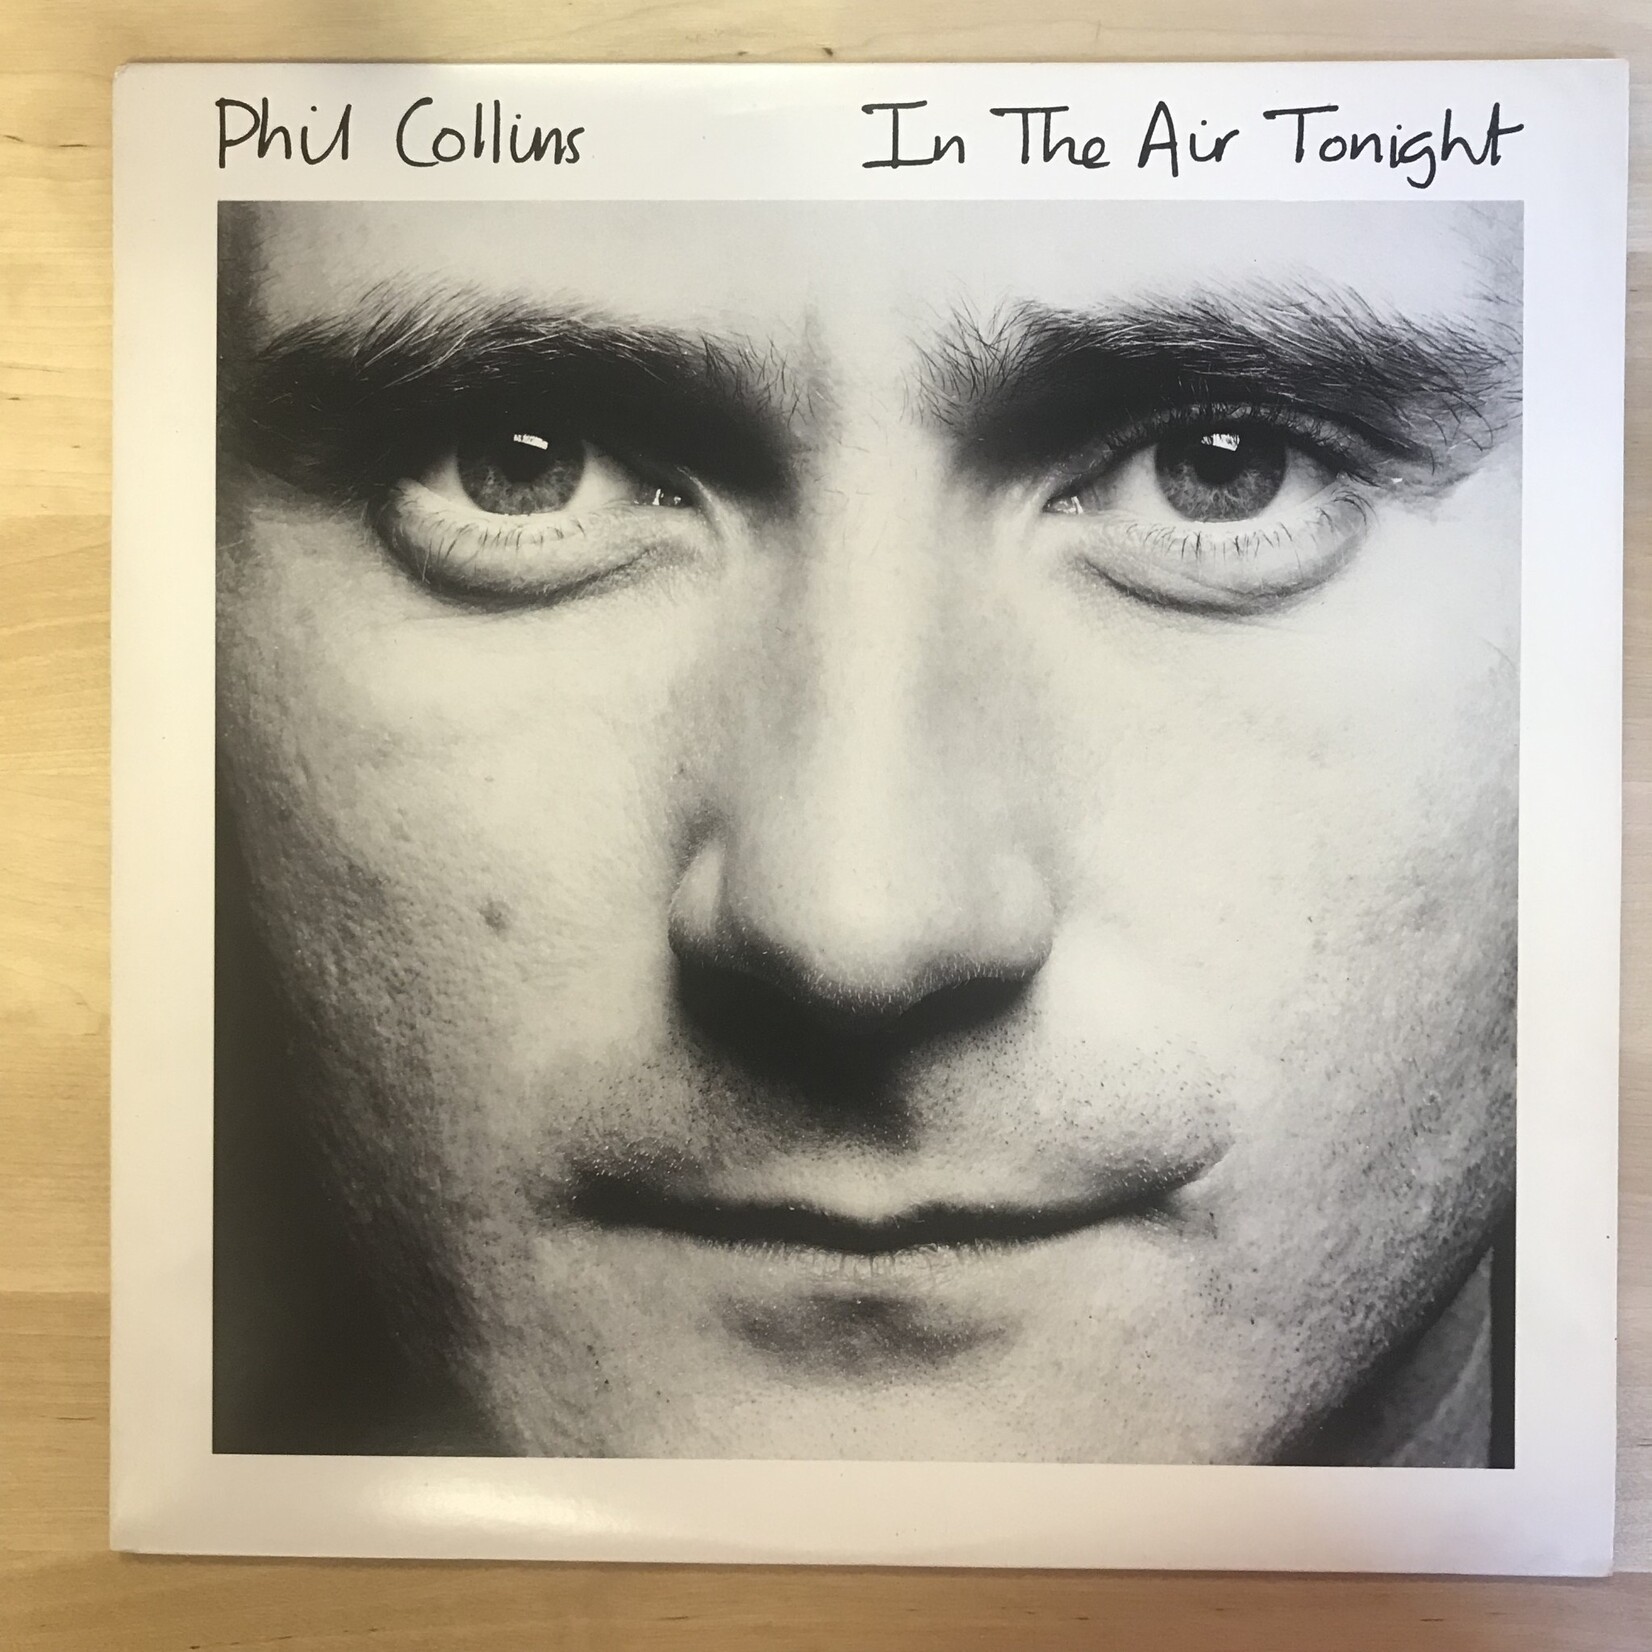 Phil Collins - In The Air Tonight - Vinyl 12-Inch Single (USED)